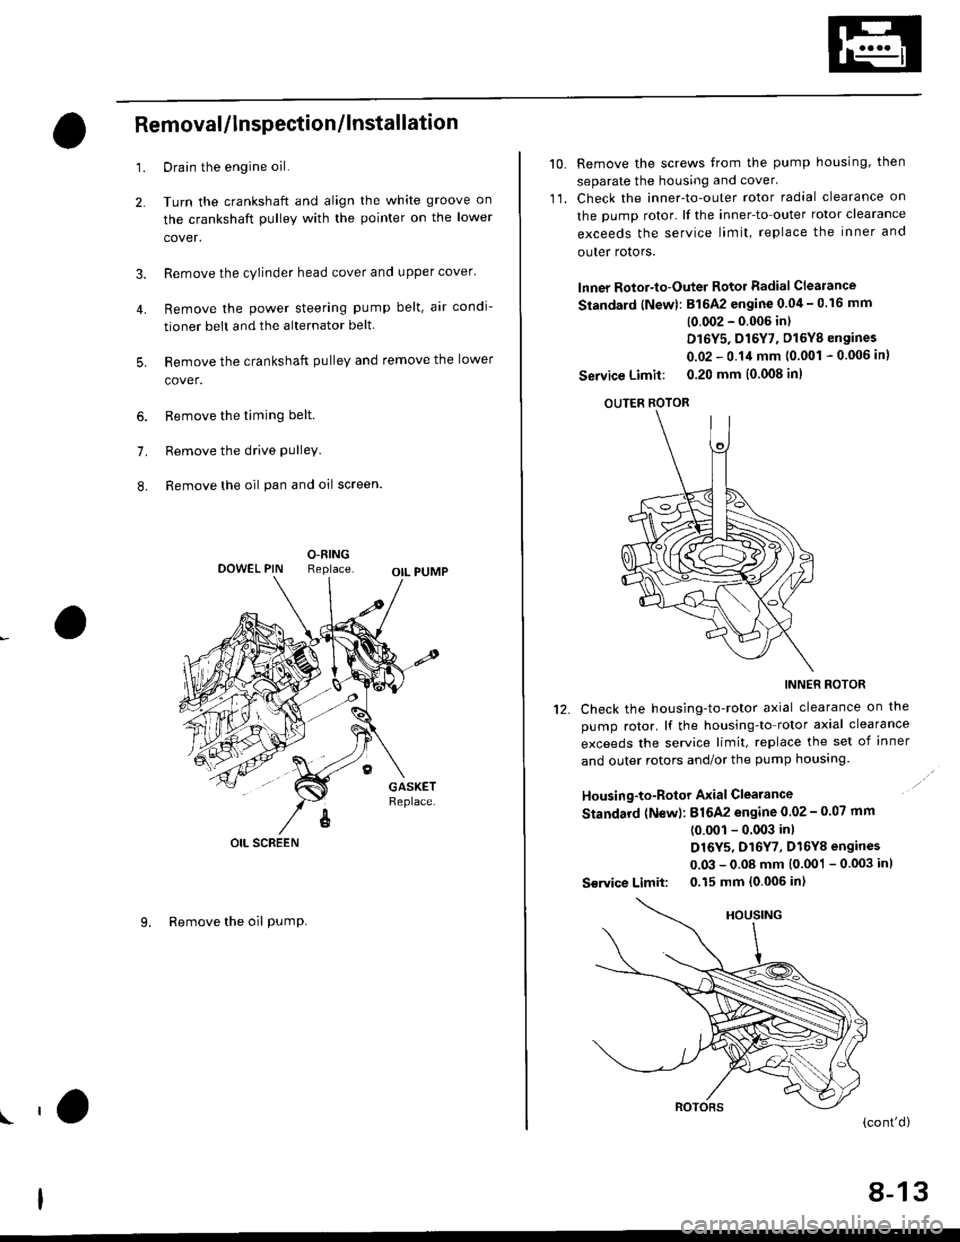 HONDA CIVIC 1996 6.G Workshop Manual 4.
Removal/lnspection/lnstallation
2.
3.
1.
5.
6.
1.
8.
Drain the engine oil.
Turn the crankshaft and align the white groove on
the crankshaft pulley with the pointer on the lower
cover.
Remove the cy